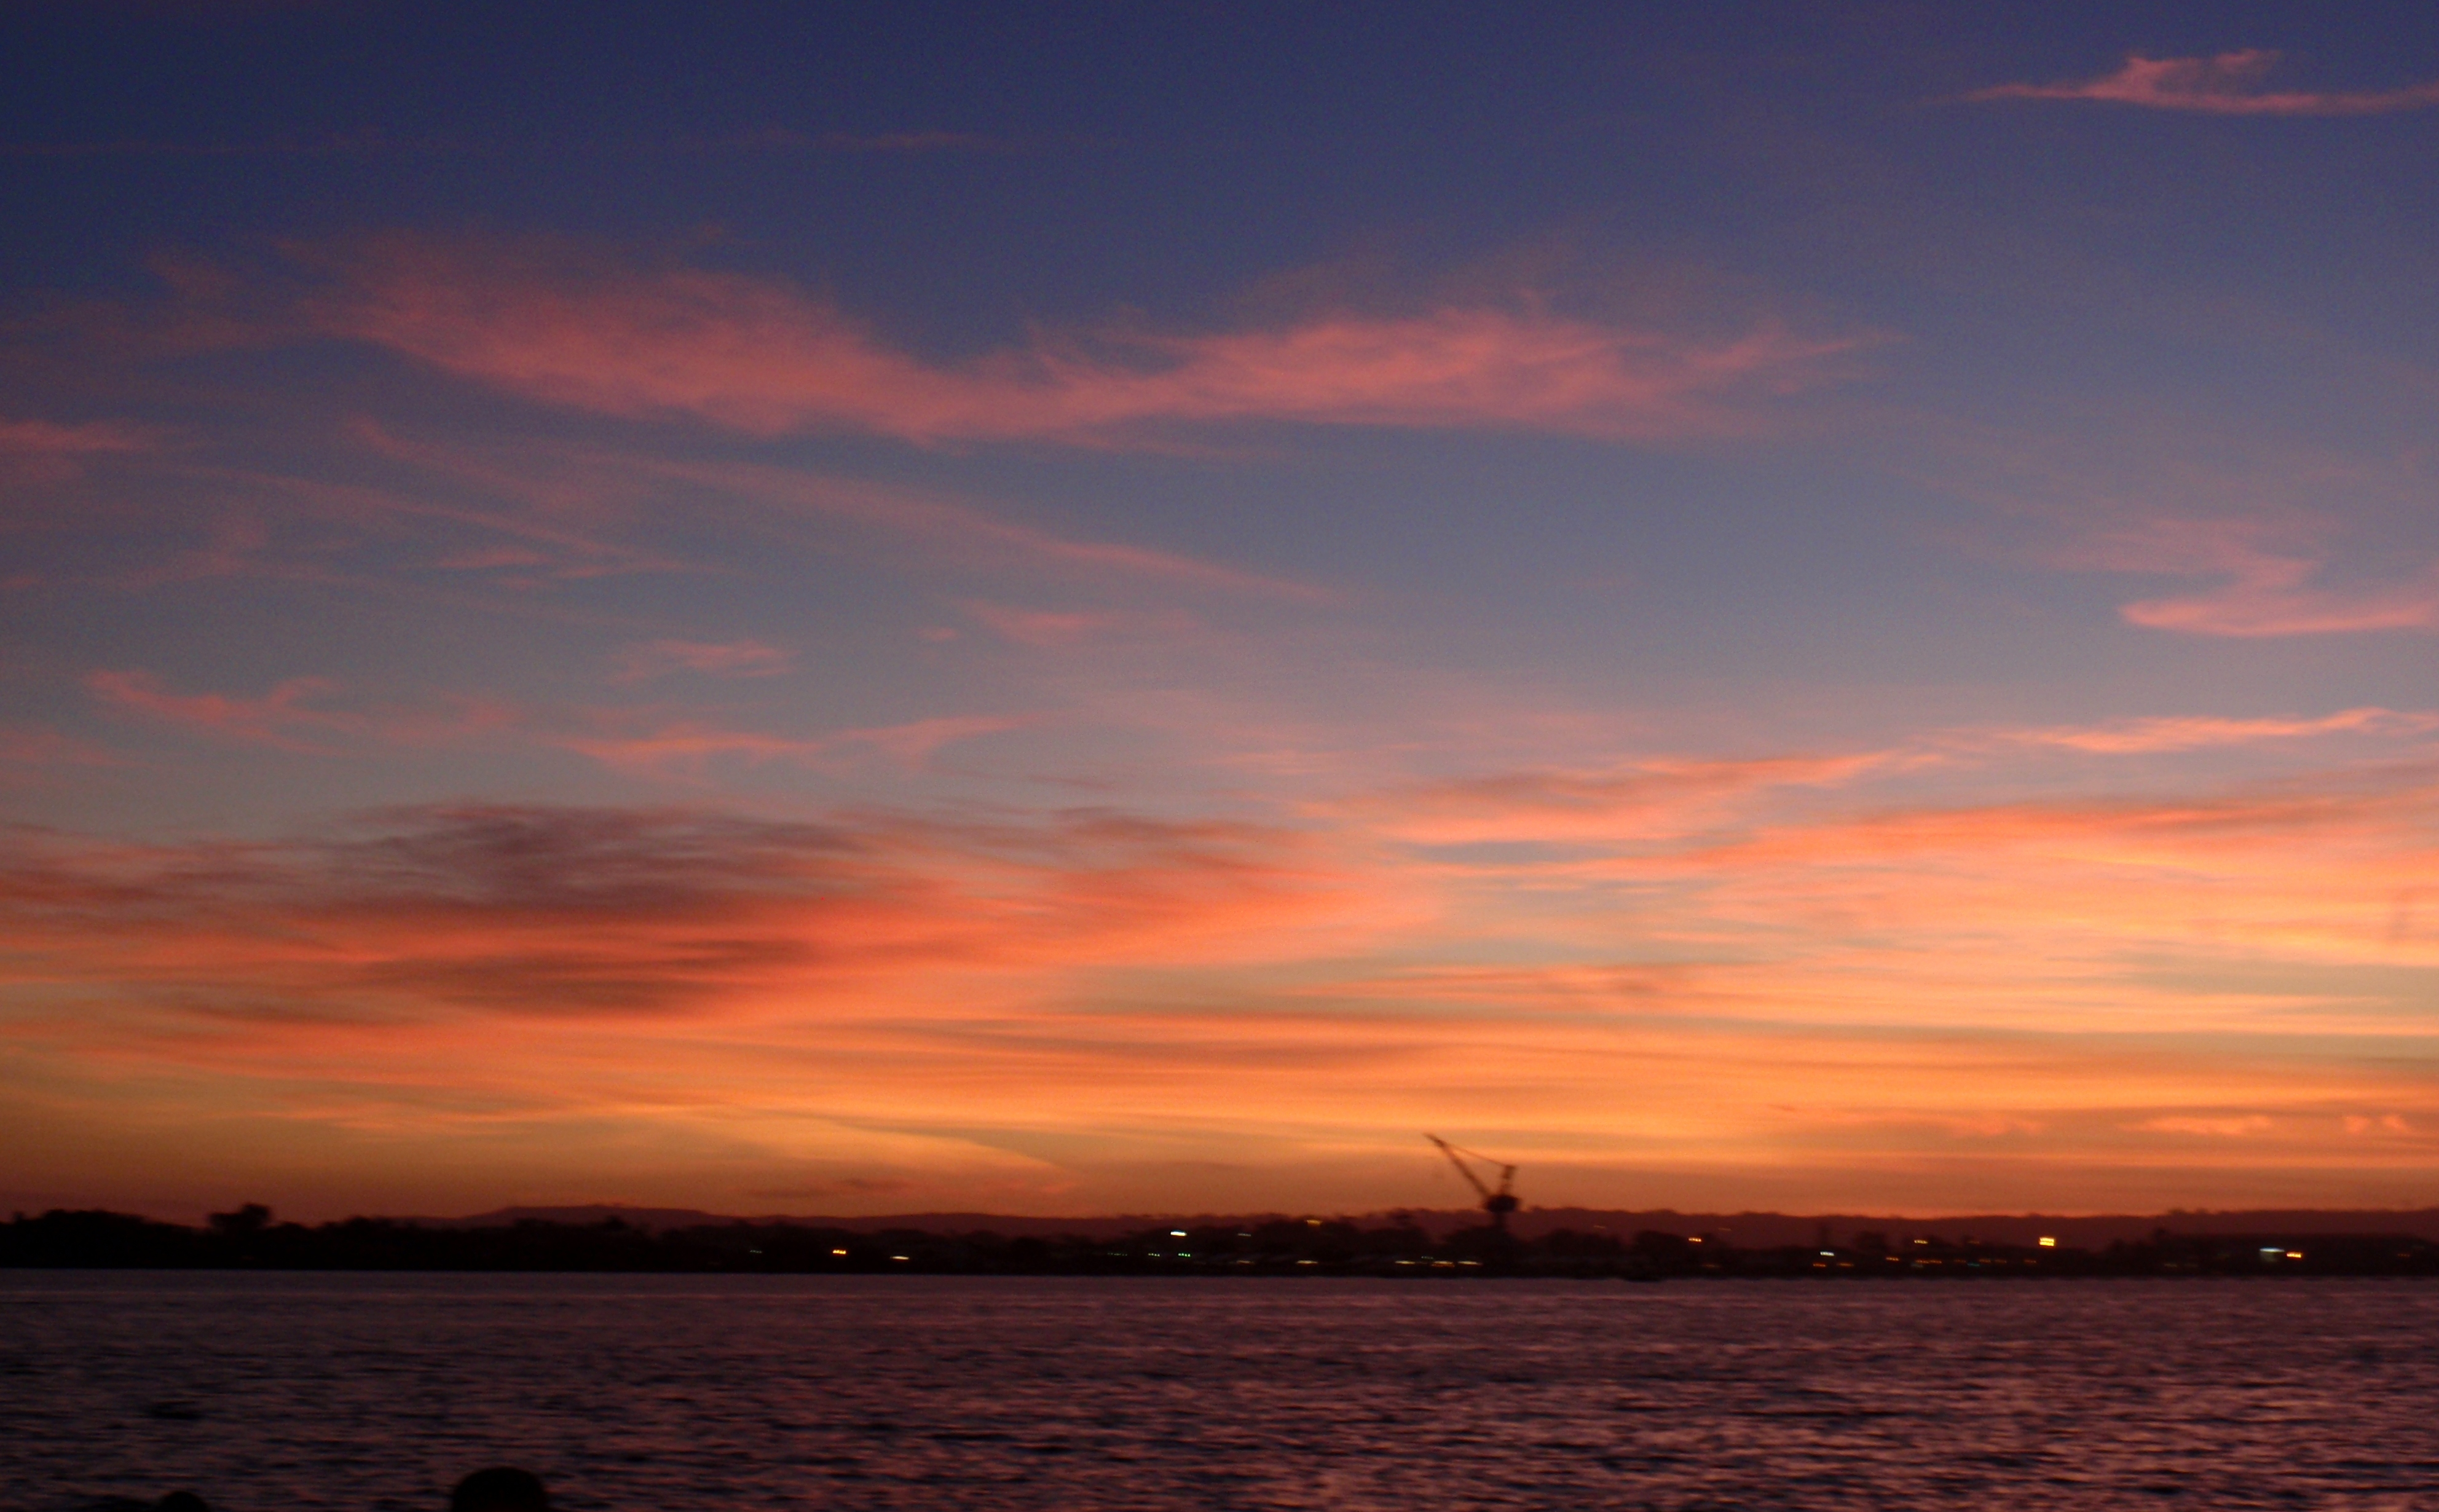 sunset over San Diego, 10/9/15, photo by James Ulvog.